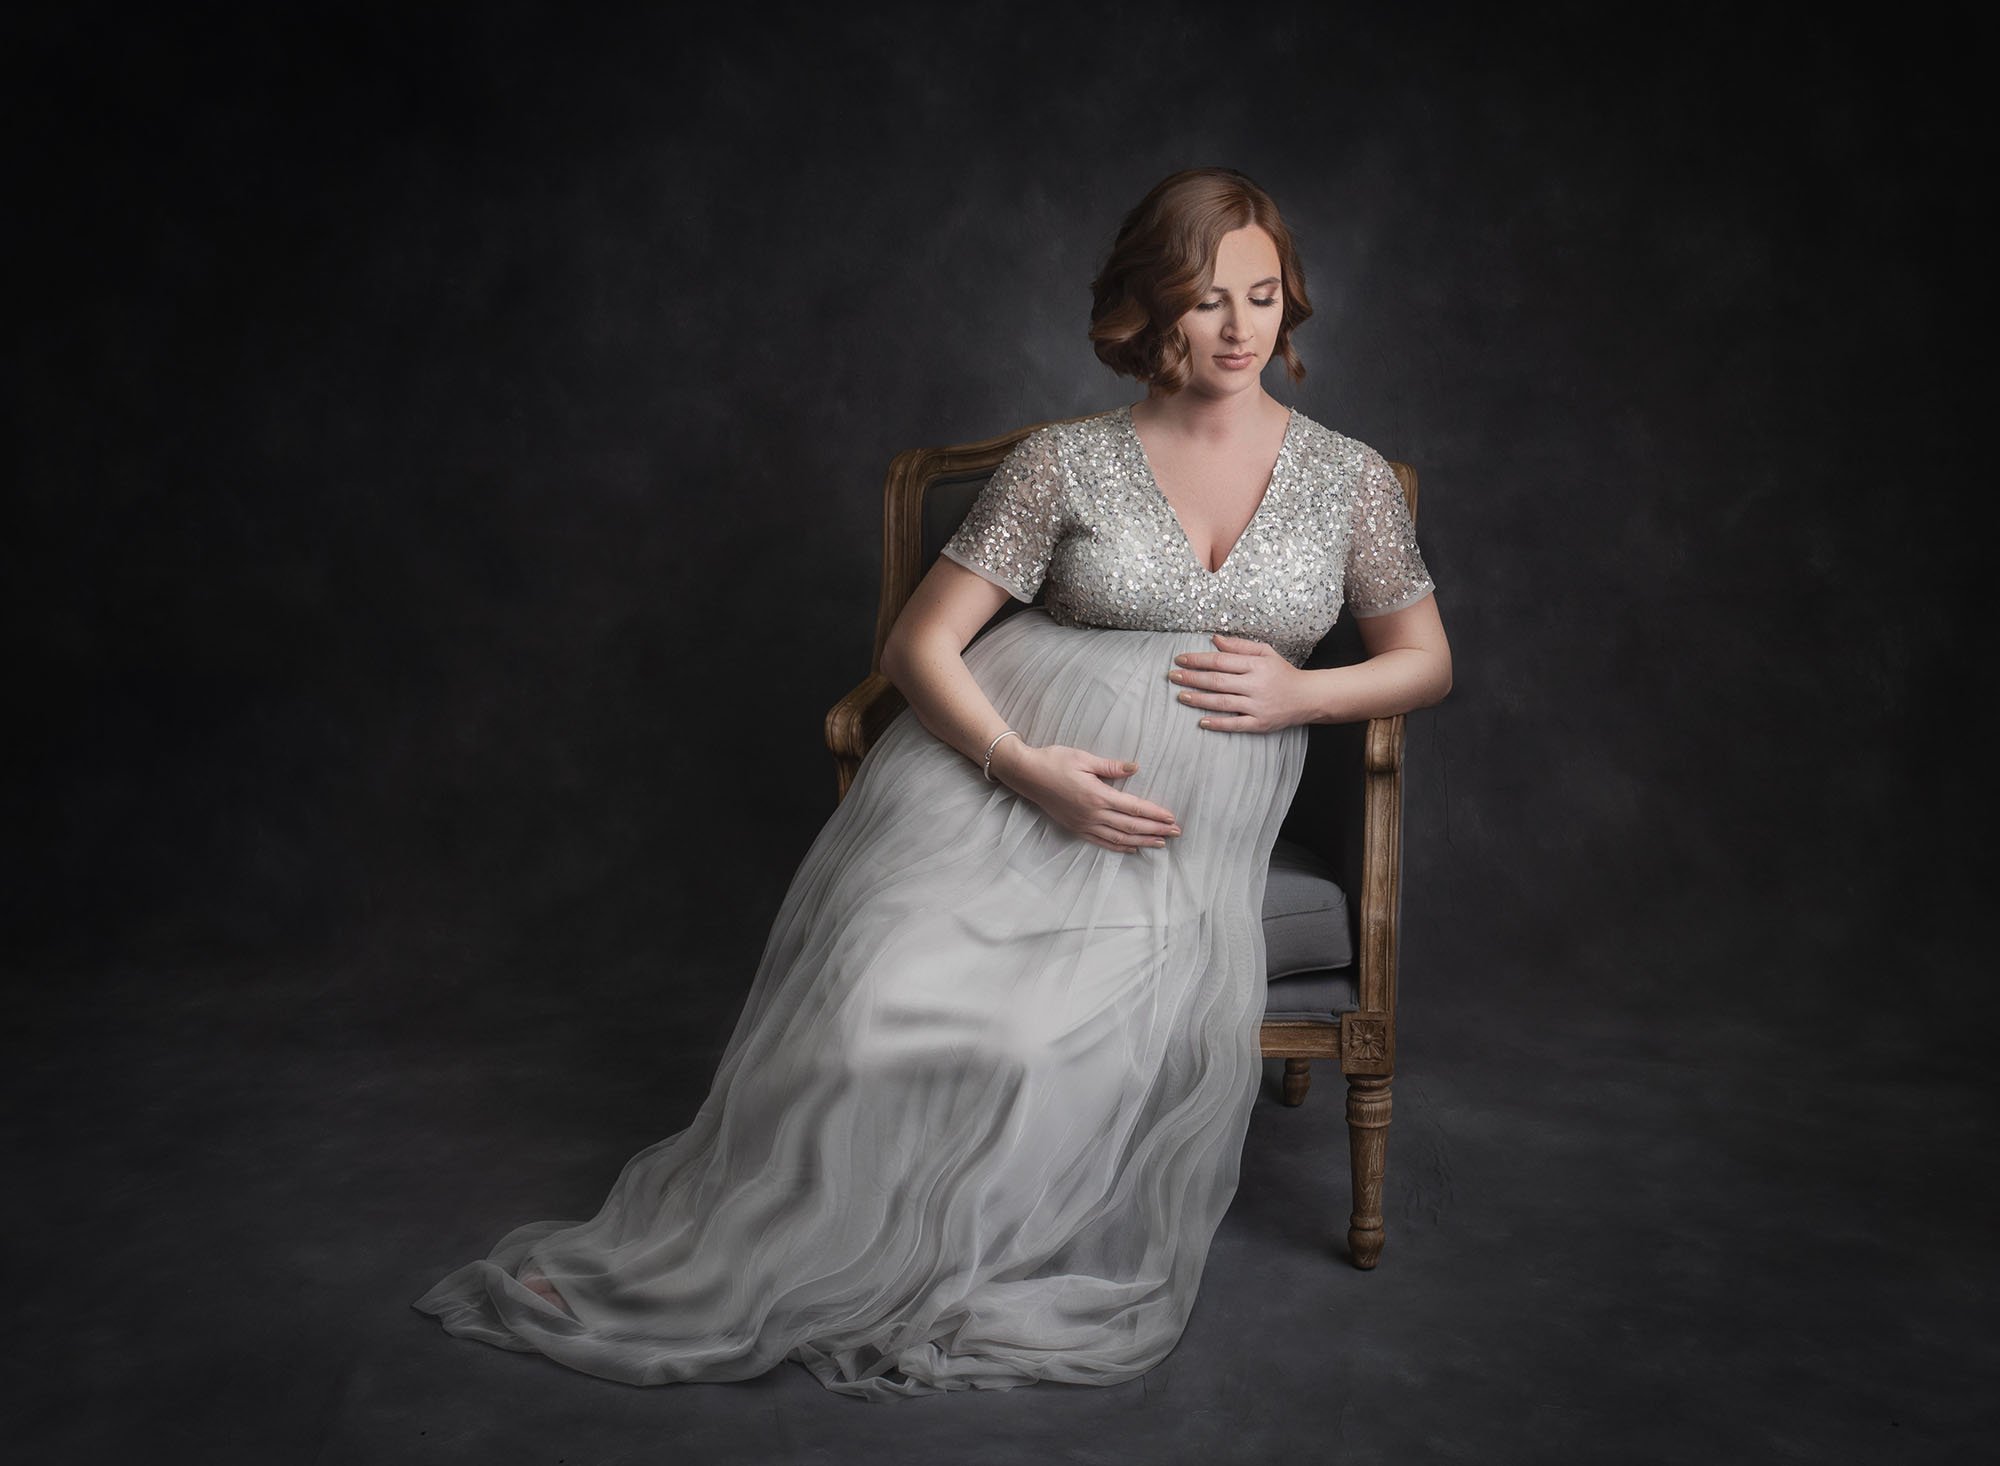 The fine art of maternity photography